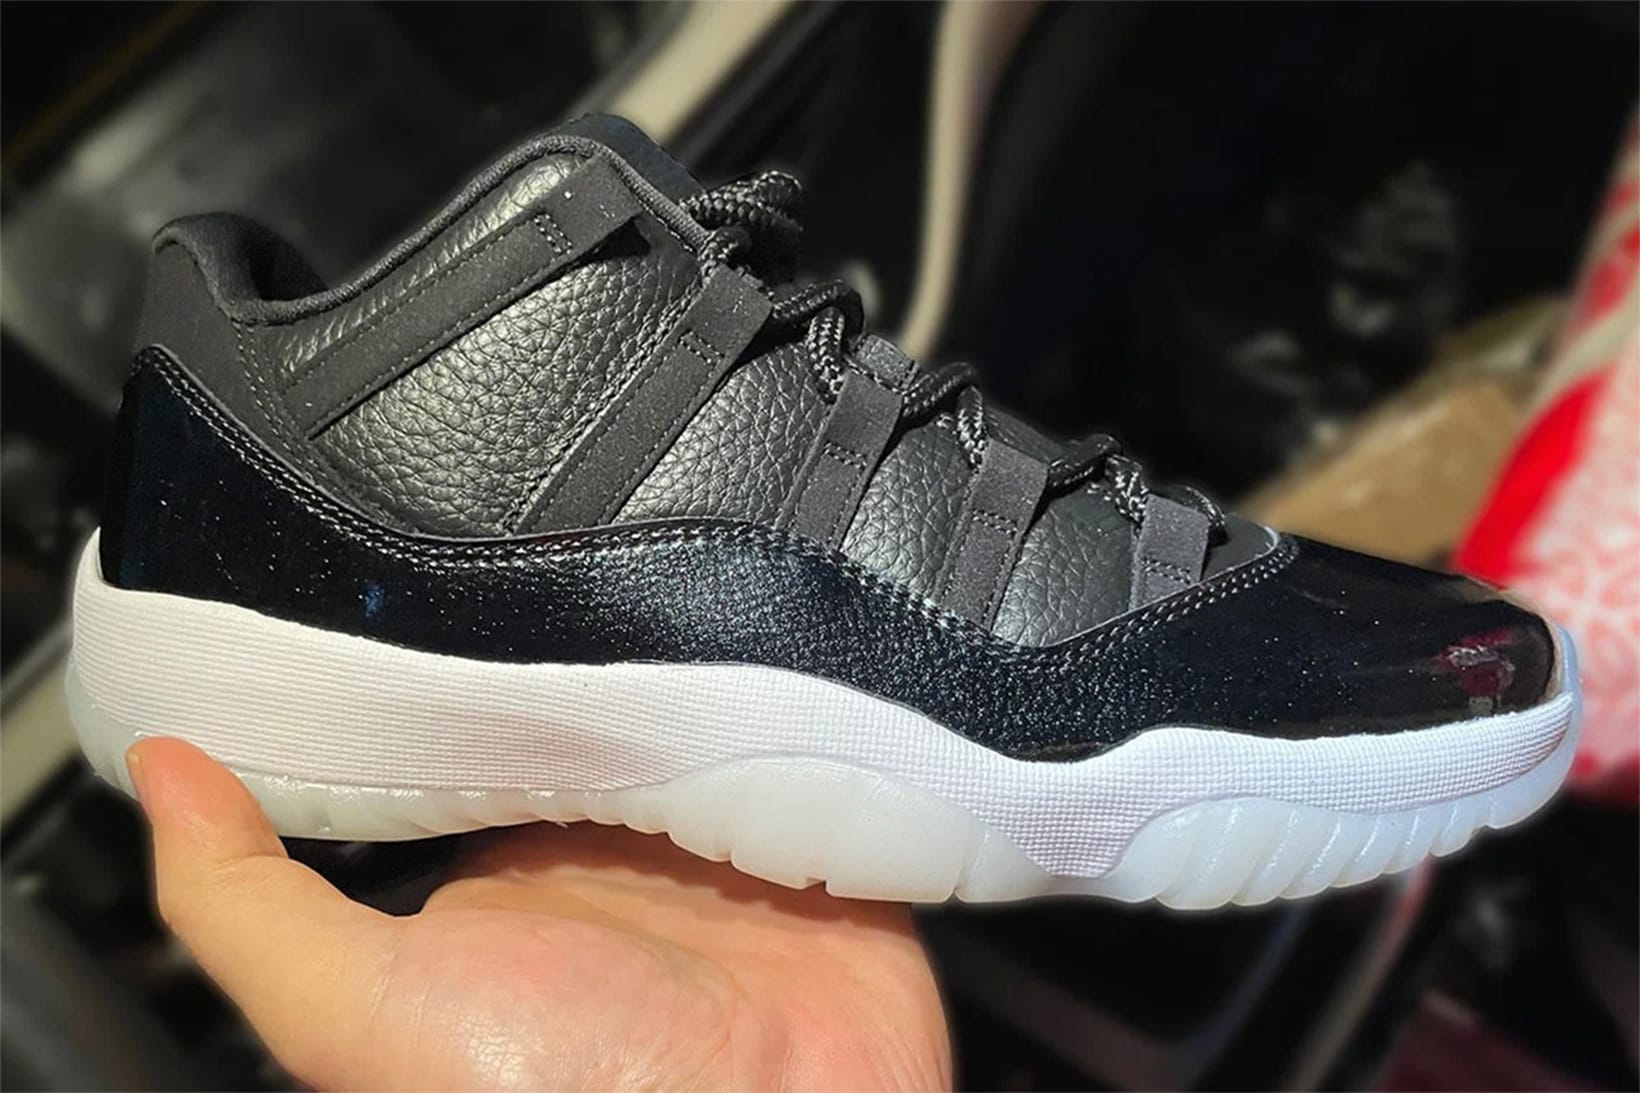 how much is the jordan 11s